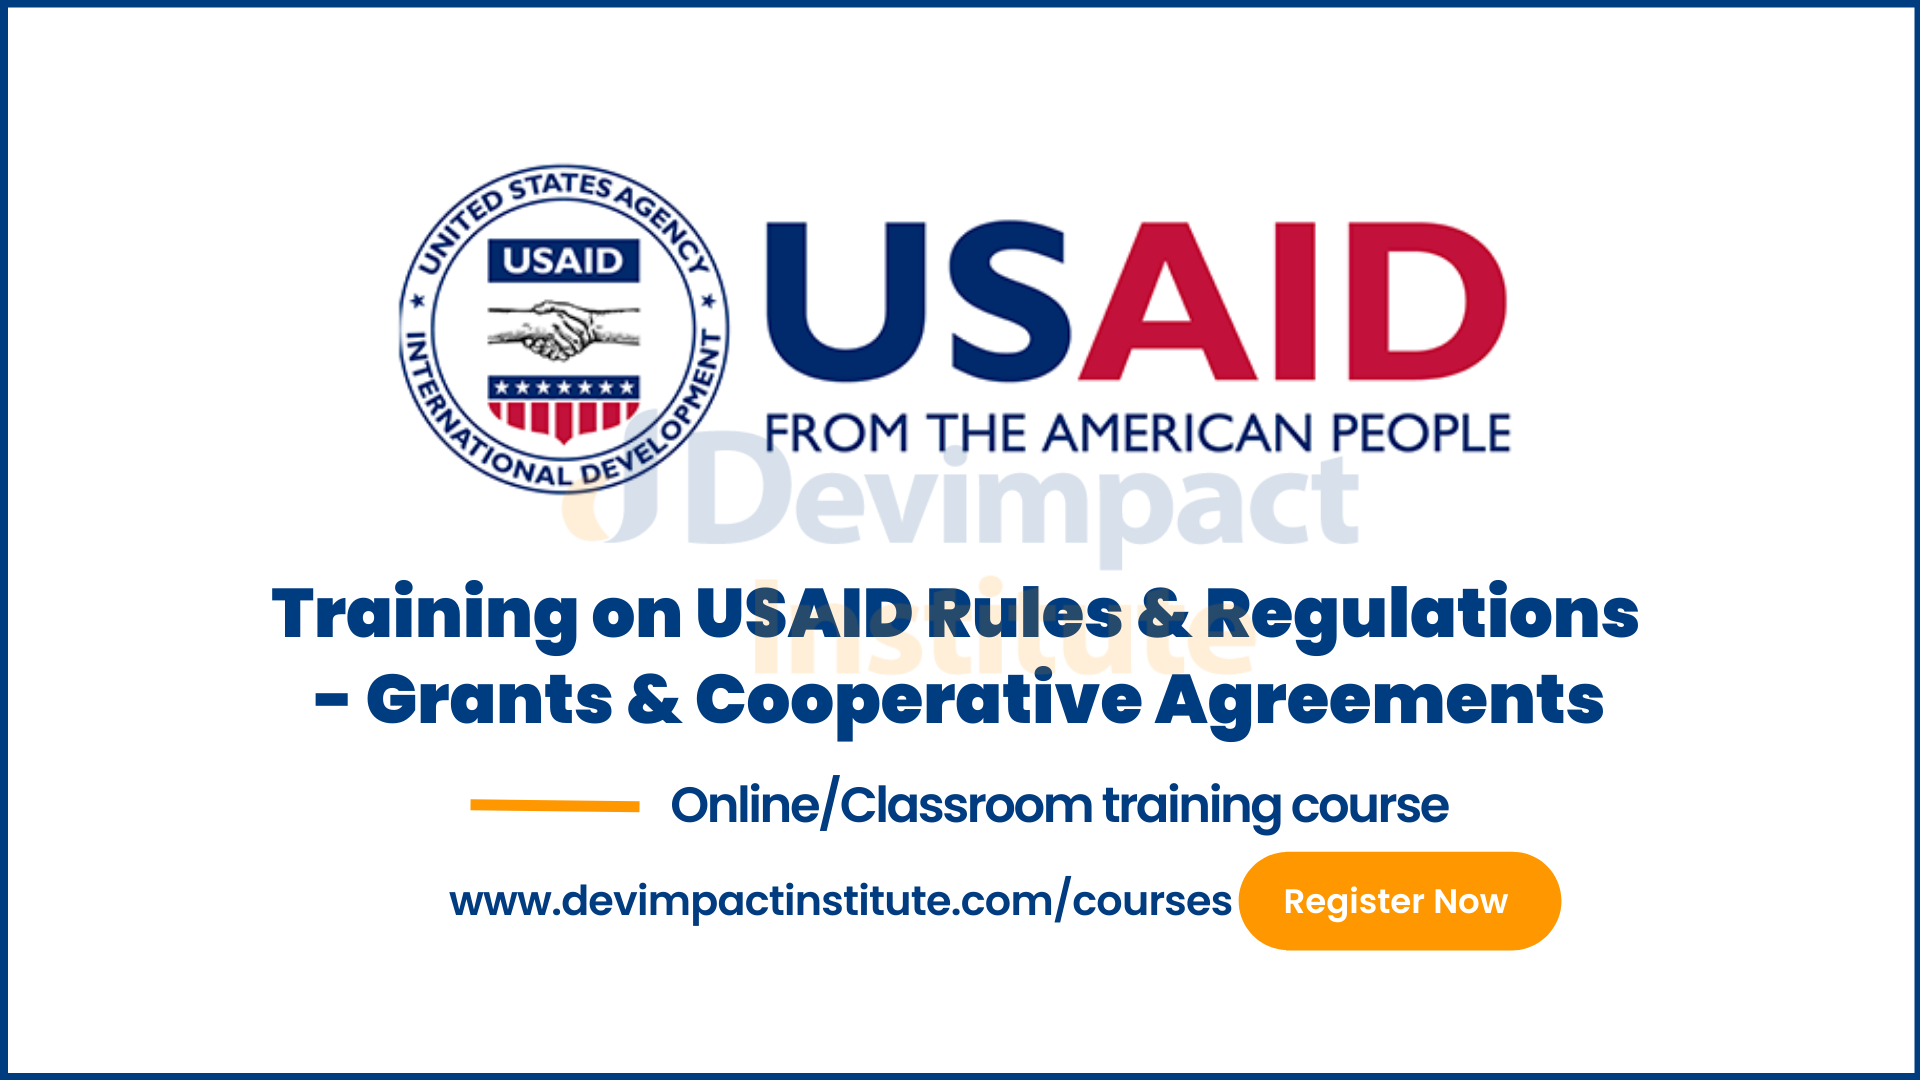 Training on USAID Rules & Regulations - Grants & Cooperative Agreements, Online Event